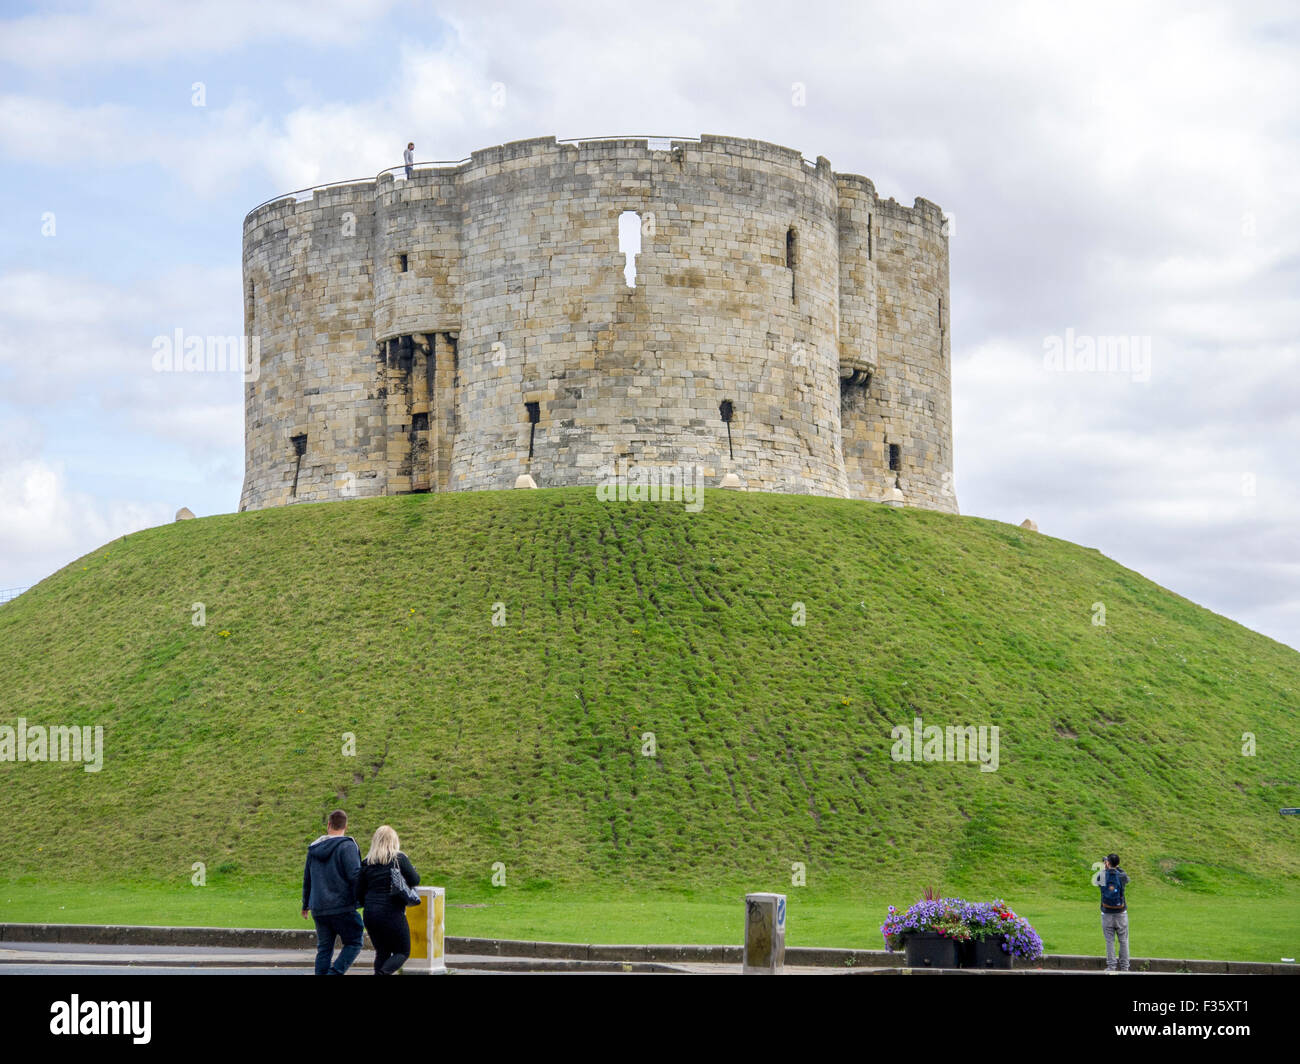 People viewing Cliffords Tower in York Stock Photo